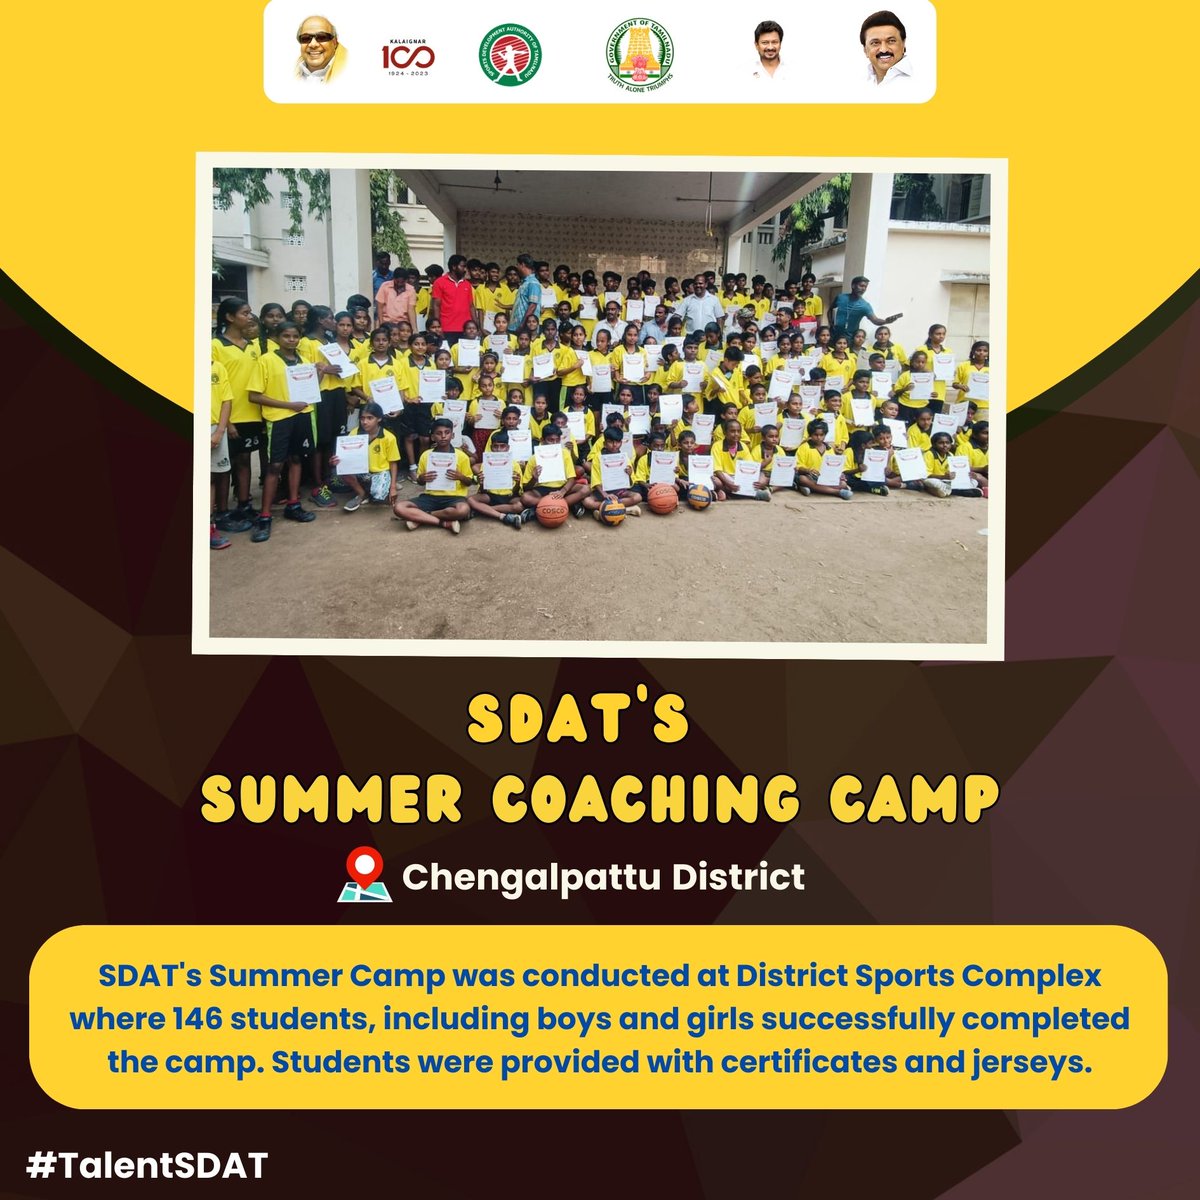 SDAT's Summer Coaching Camp was conducted at various District Sports Complexes and students who successfully completed the camp were provided with certificates and jerseys.

#CMOTamilNadu  | #UdhayStalin | #DayanidhiMaran  | #sdat |  #DMK | #MKStalin | #DMK4YOUTH | #sports